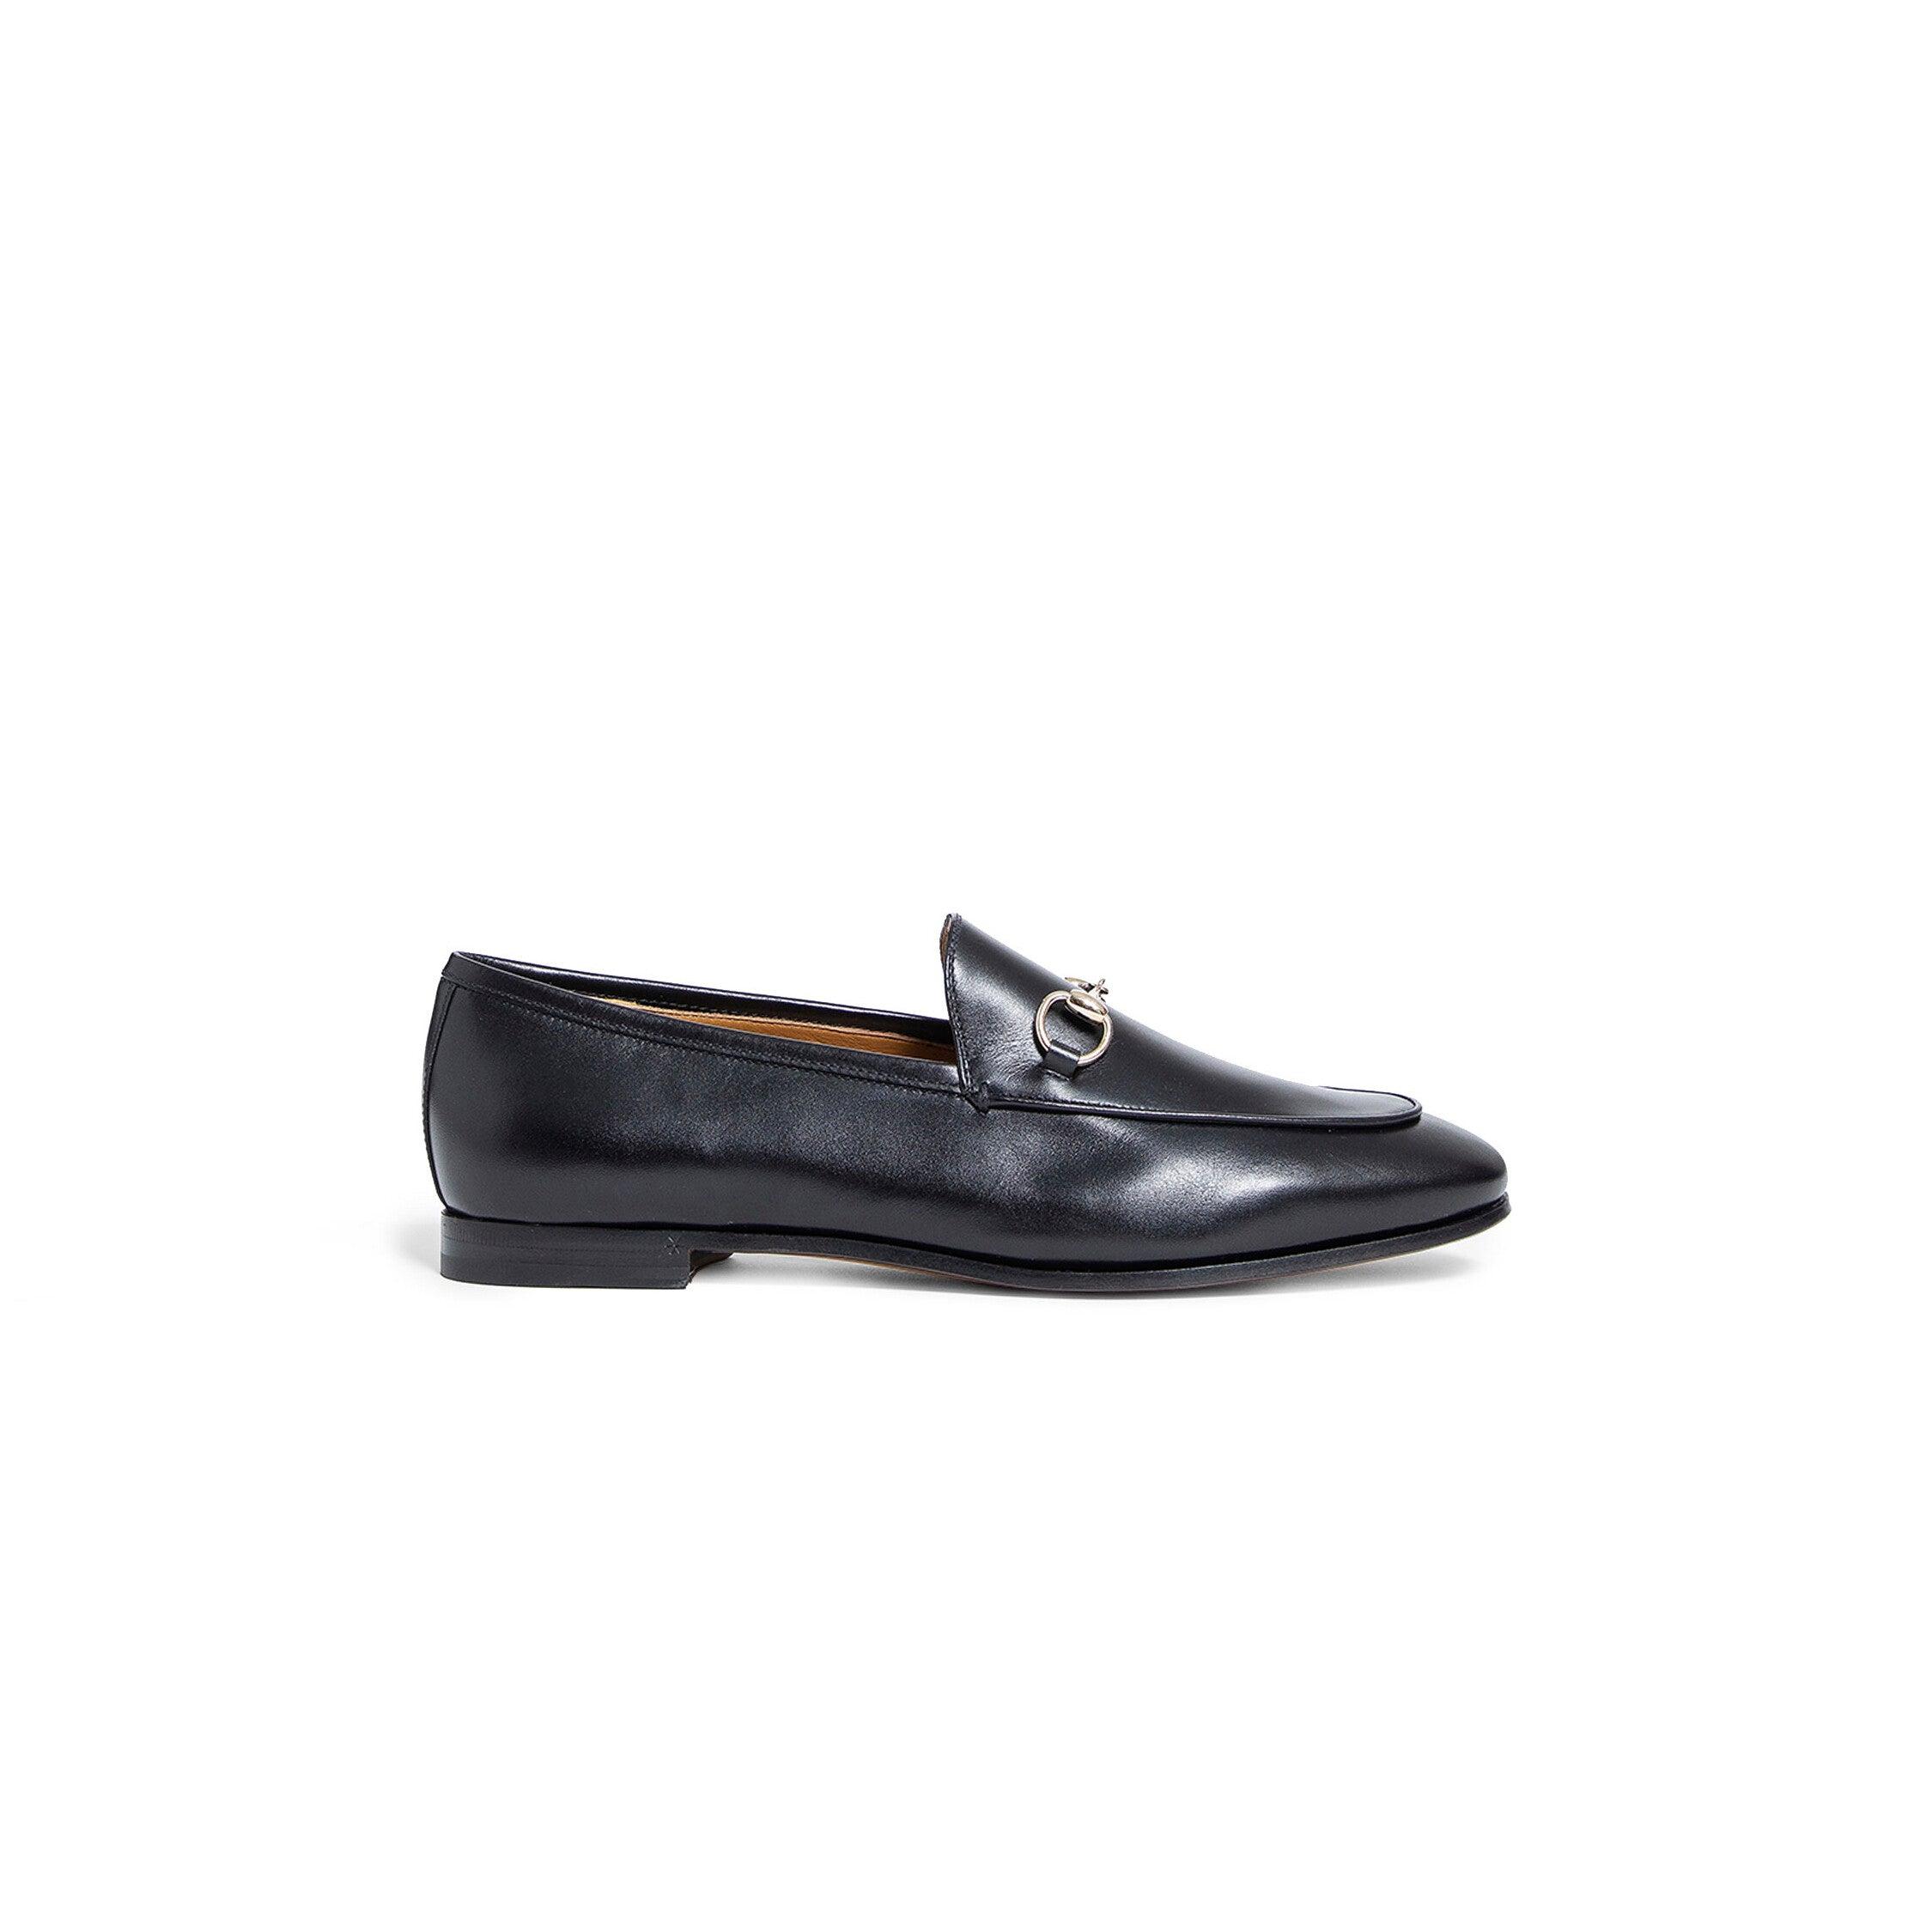 GUCCI WOMAN BLACK LOAFERS